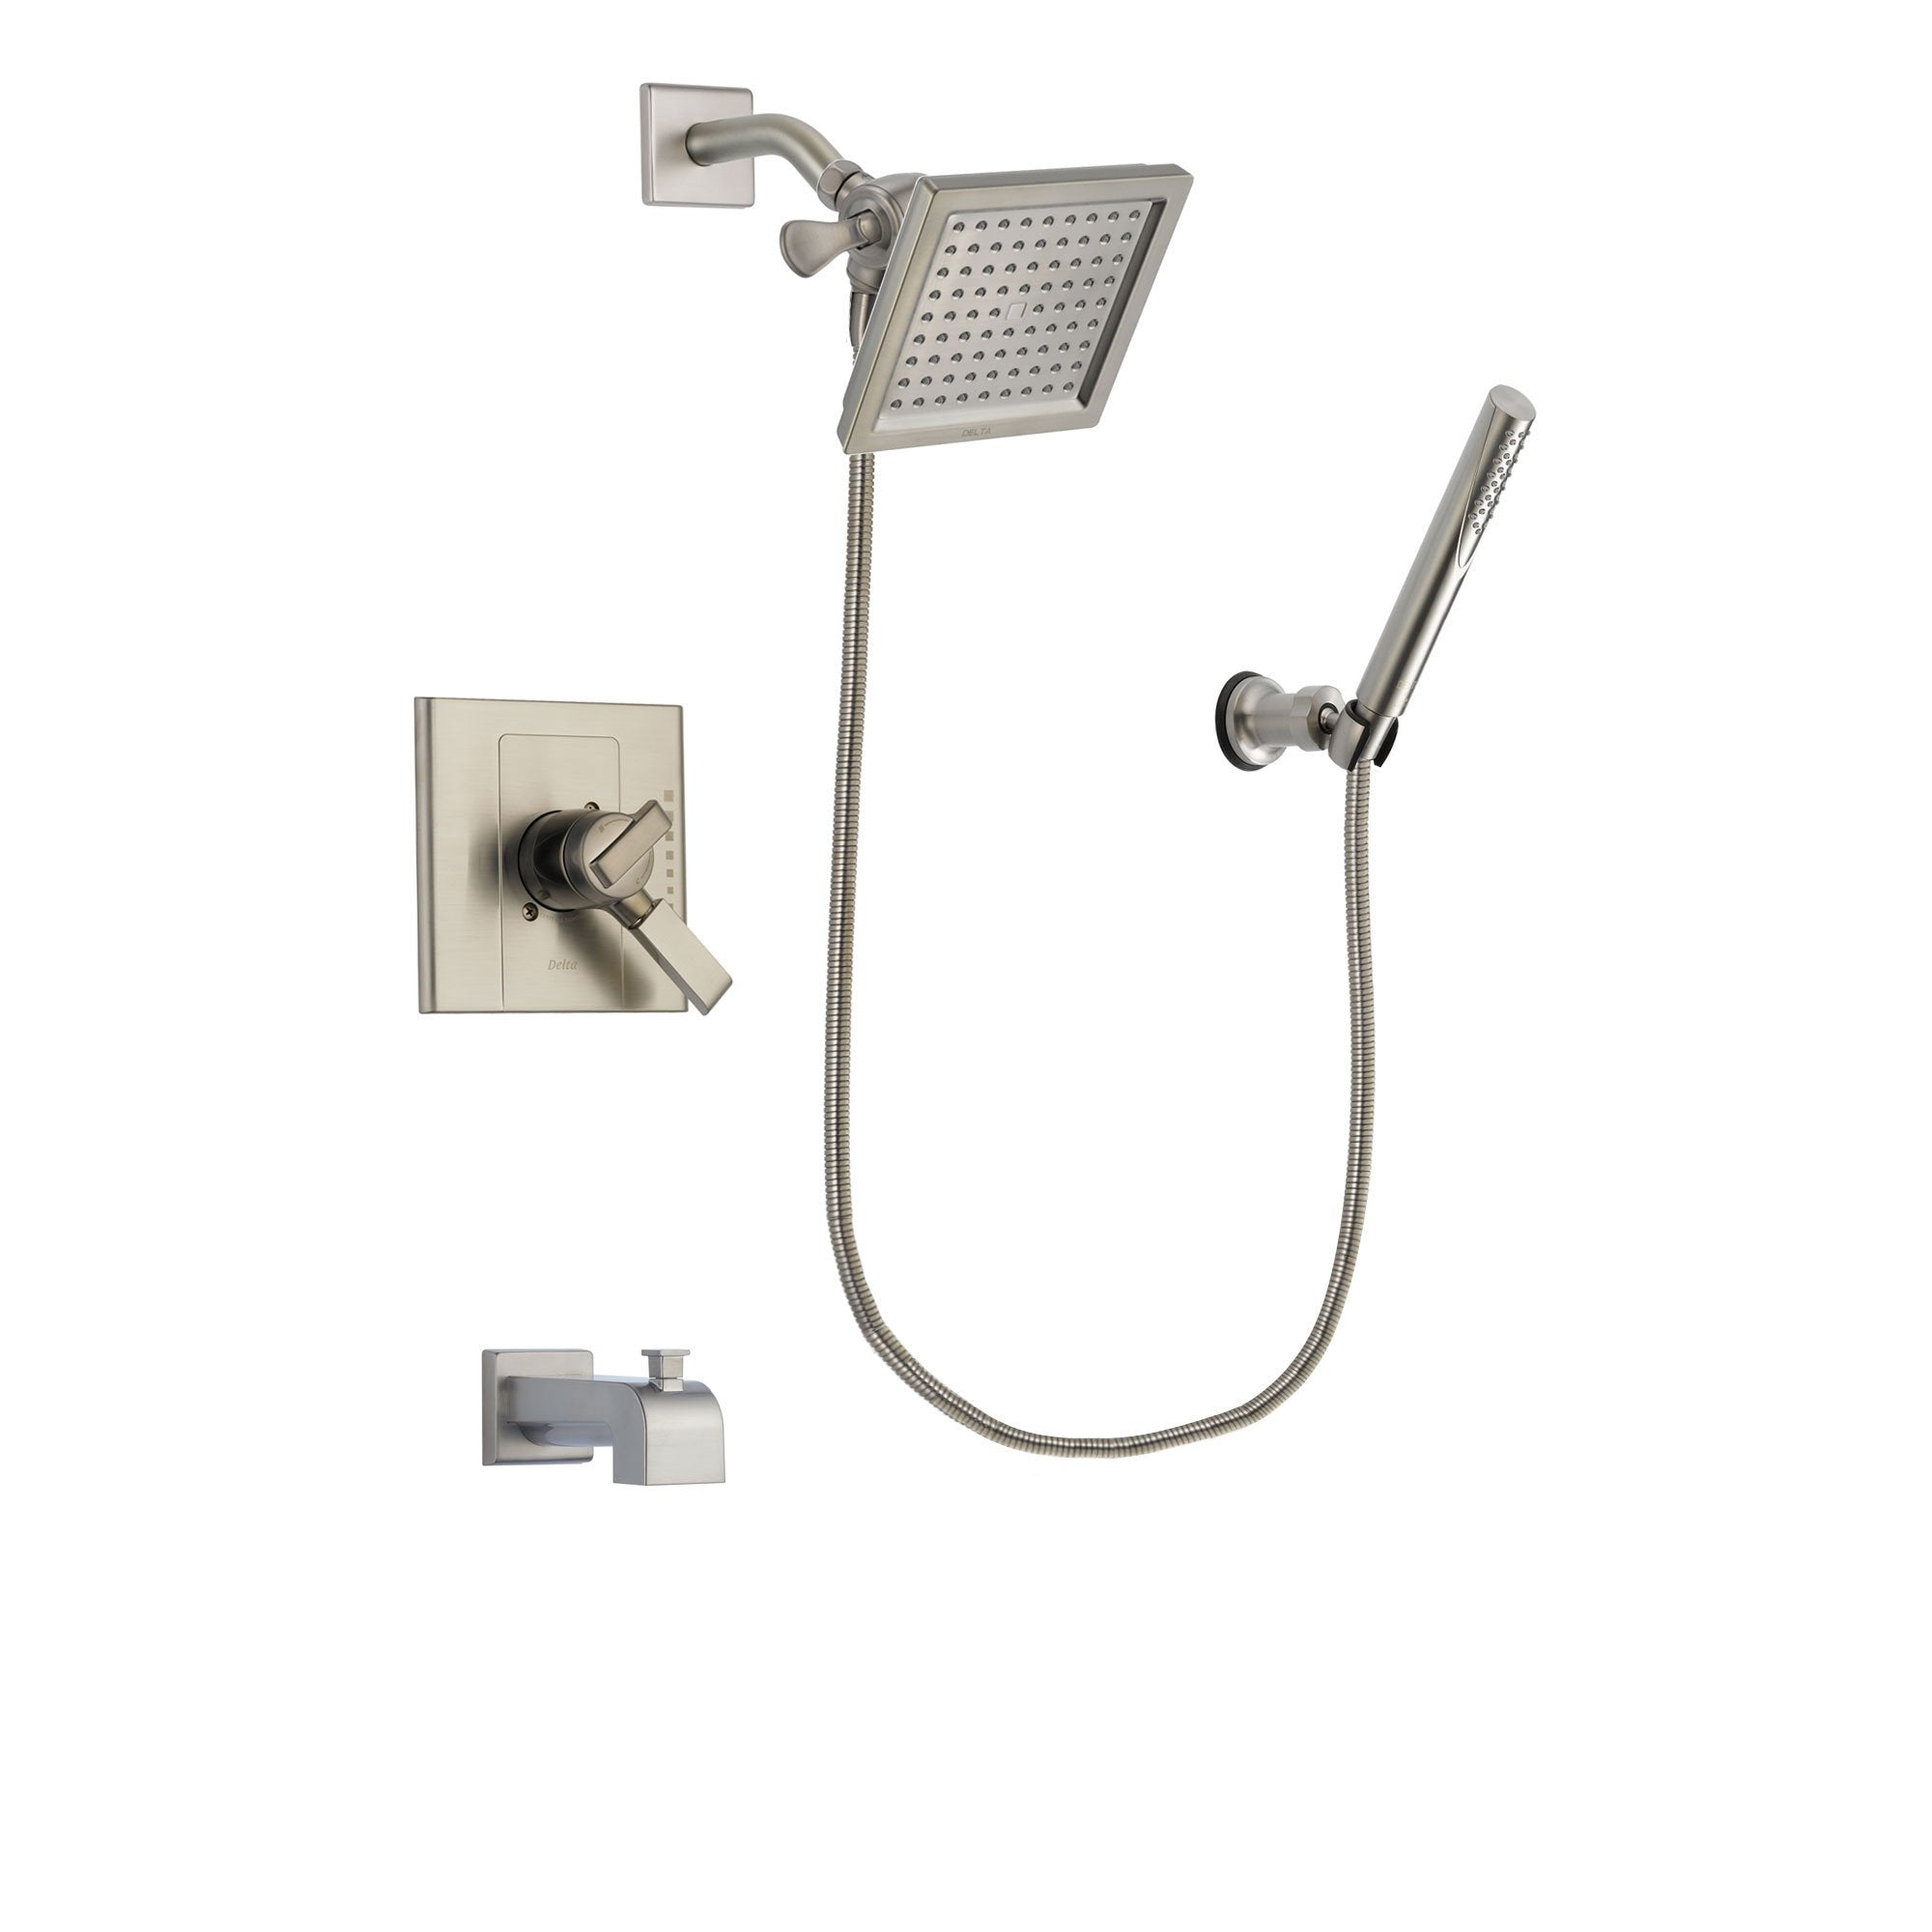 Delta Arzo Stainless Steel Finish Dual Control Tub and Shower Faucet System Package with 6.5-inch Square Rain Showerhead and Modern Handheld Shower Spray Includes Rough-in Valve and Tub Spout DSP2145V